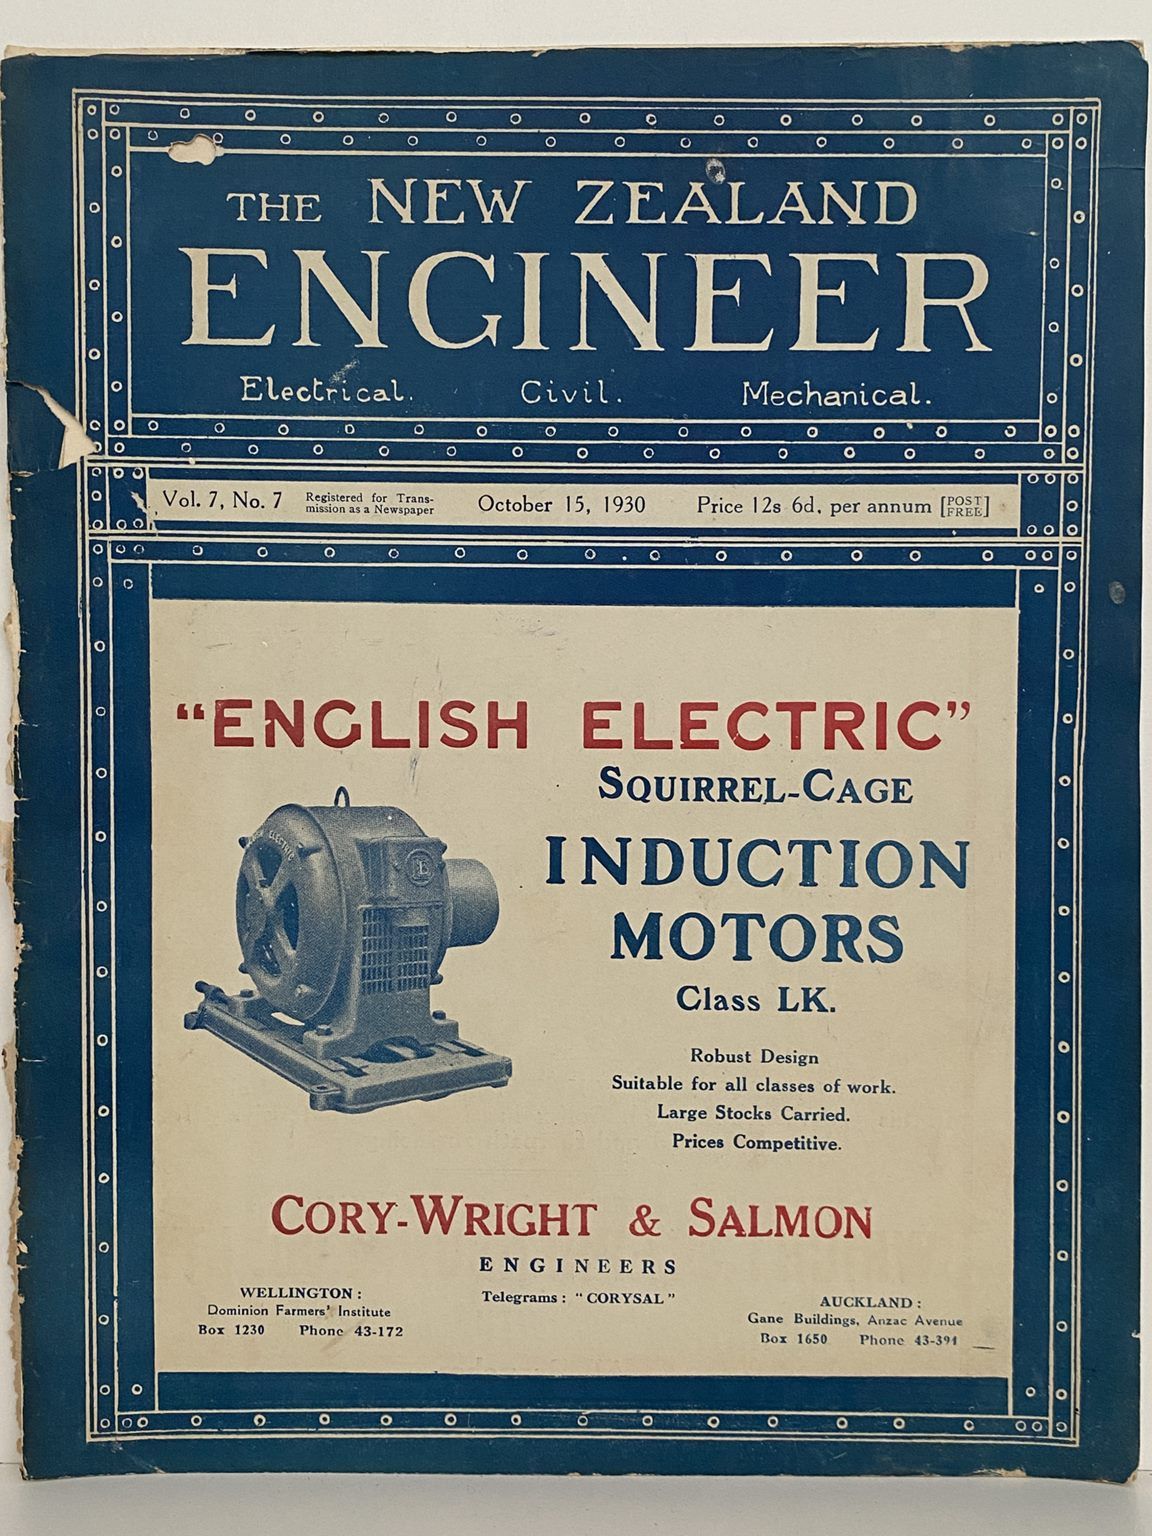 OLD MAGAZINE: The New Zealand Engineer Vol. 7, No. 7 - 15 October 1930